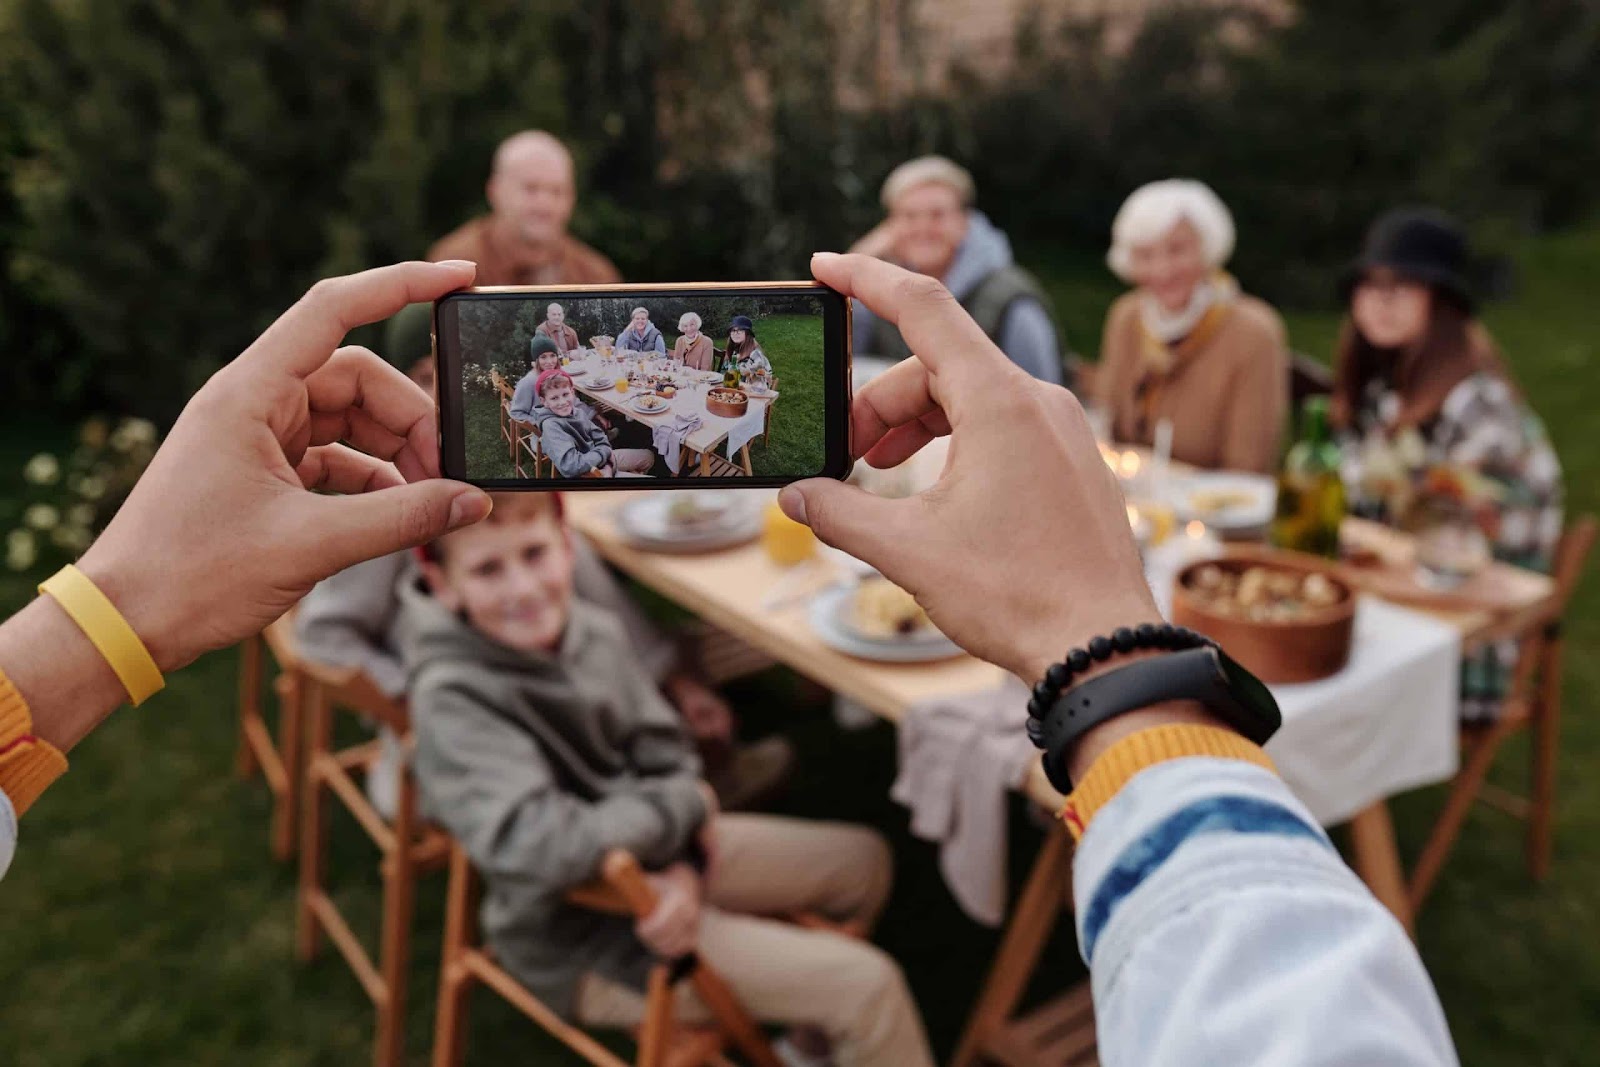 Top Ways to Capture New Memories in the Digital Age - Organizing Photos